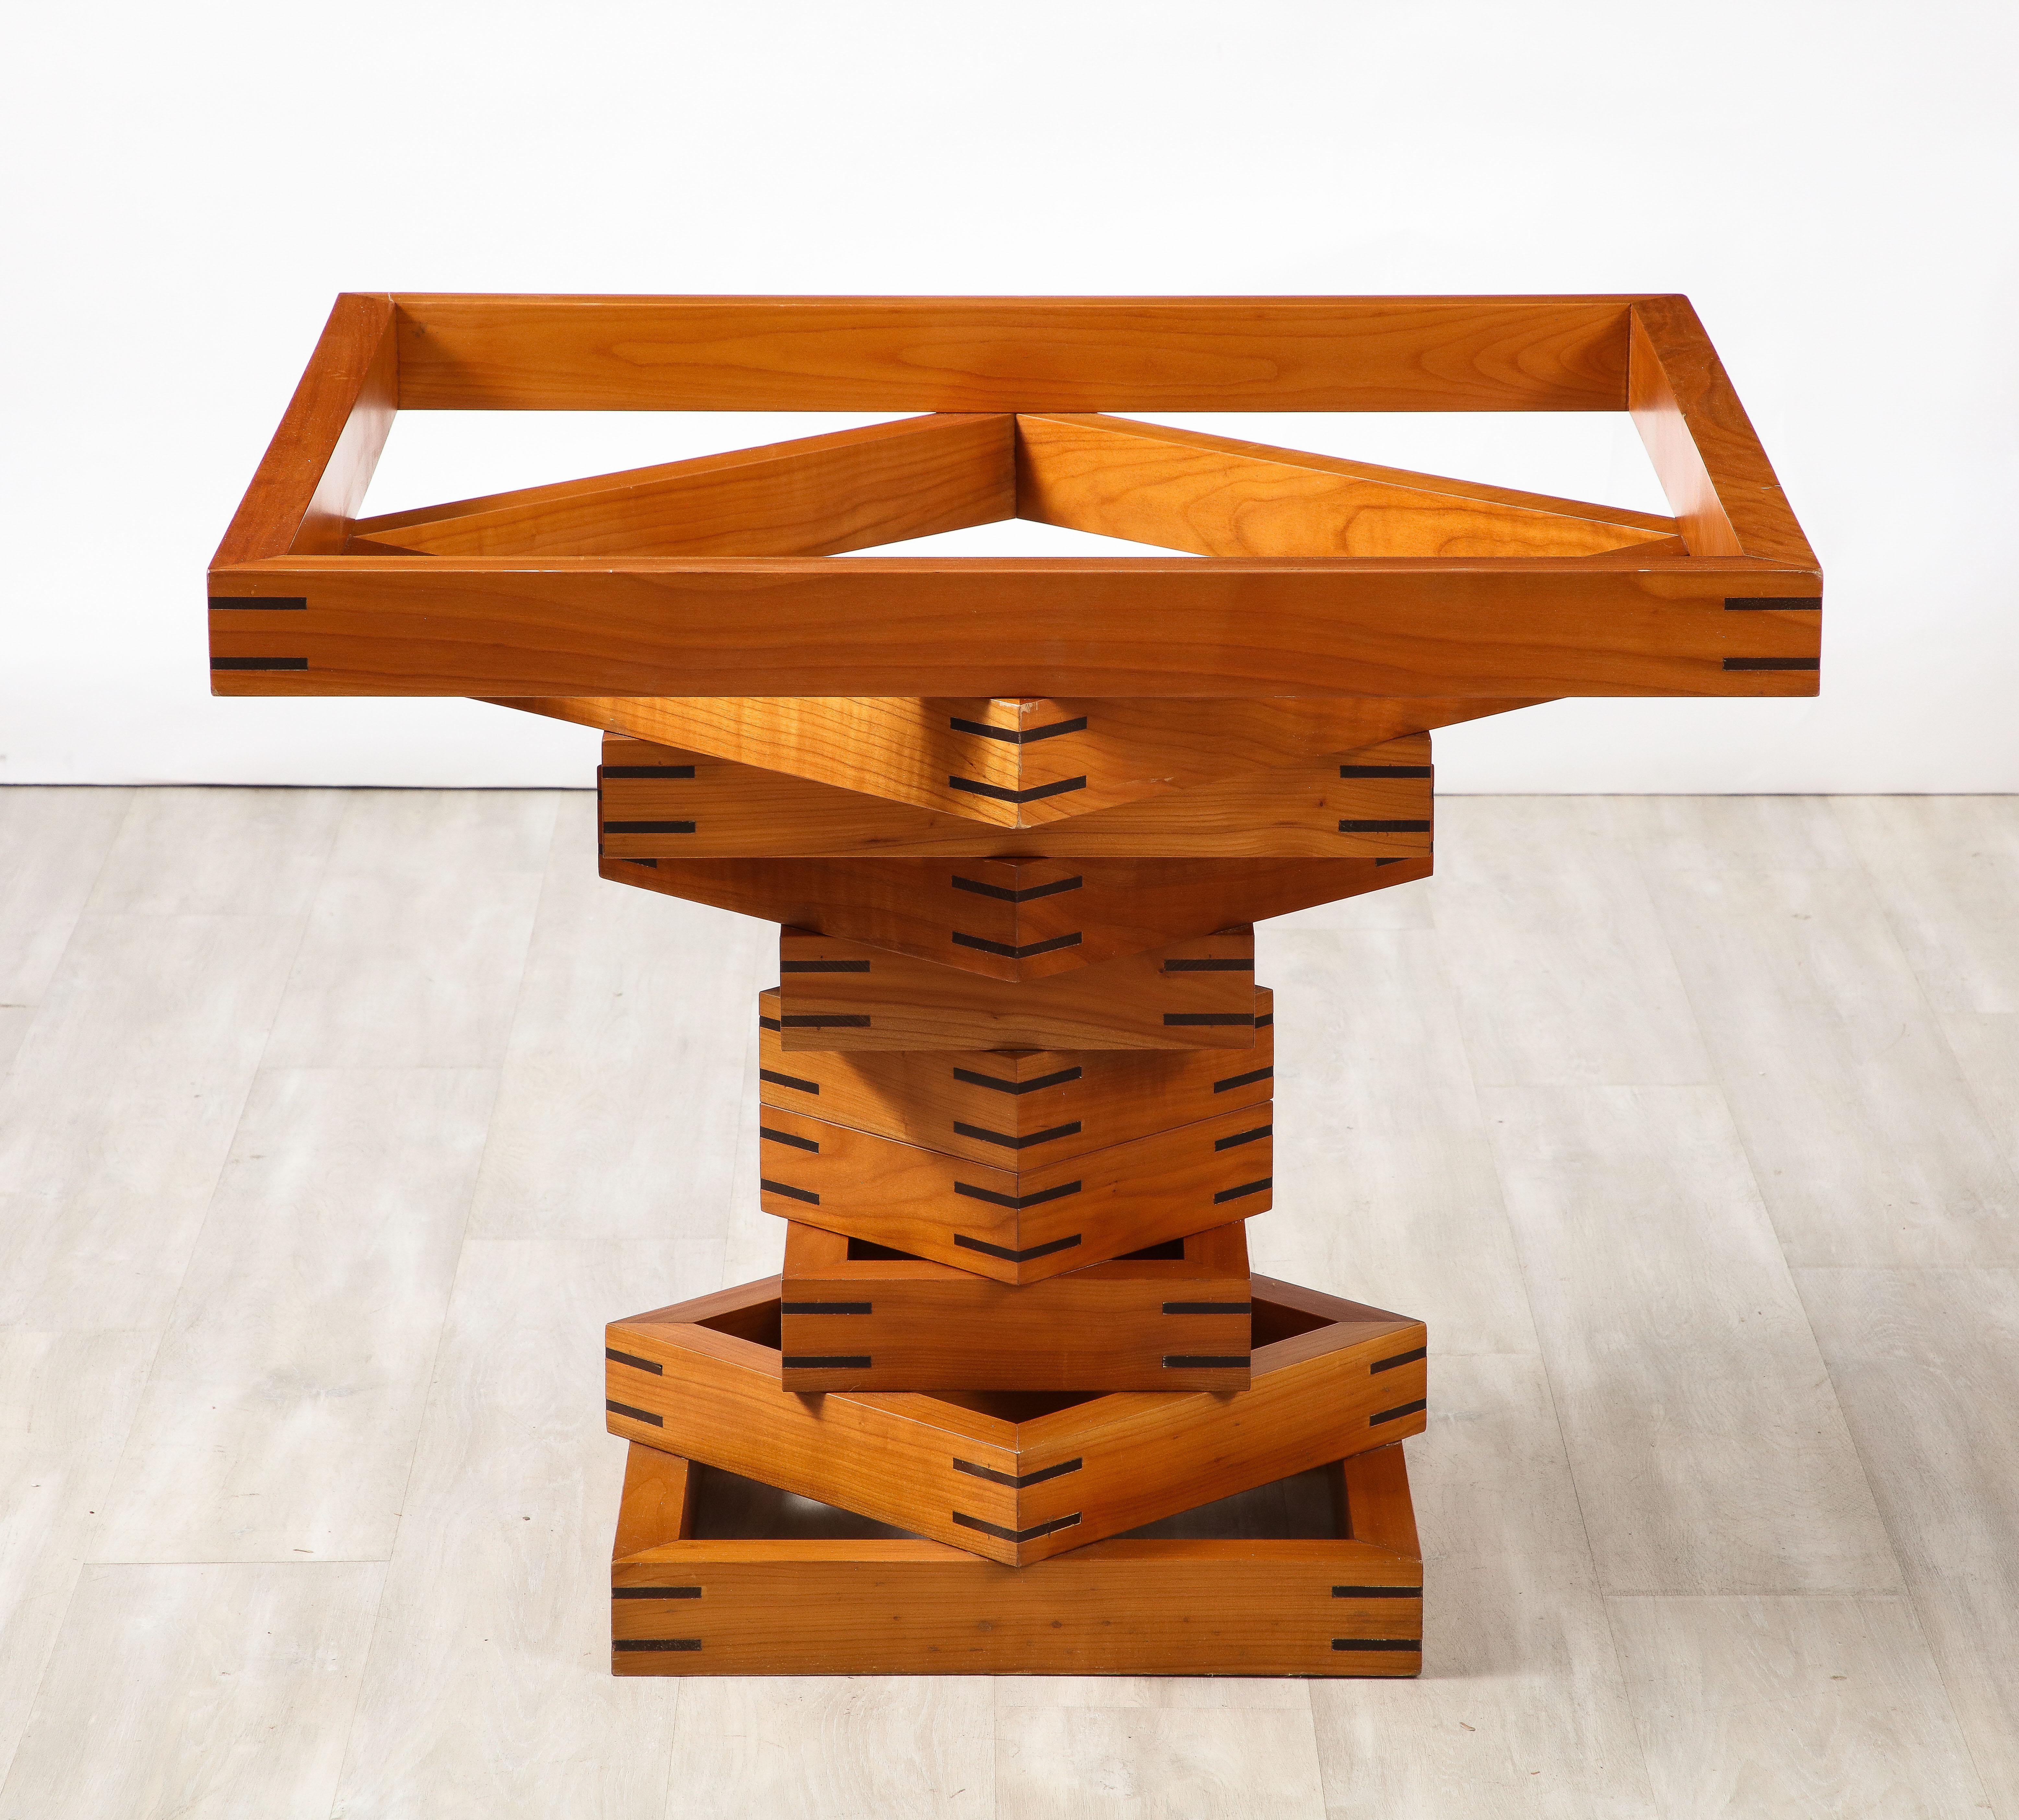 Dining Table Model “Corinto” by Ferdinando Meccani, Italy 1978

The “Corinto” dining table, designed by Ferdinando Meccani for Meccani Arredamento in 1978 was created in tandem with the sideboard that bears the same name. The base of this table